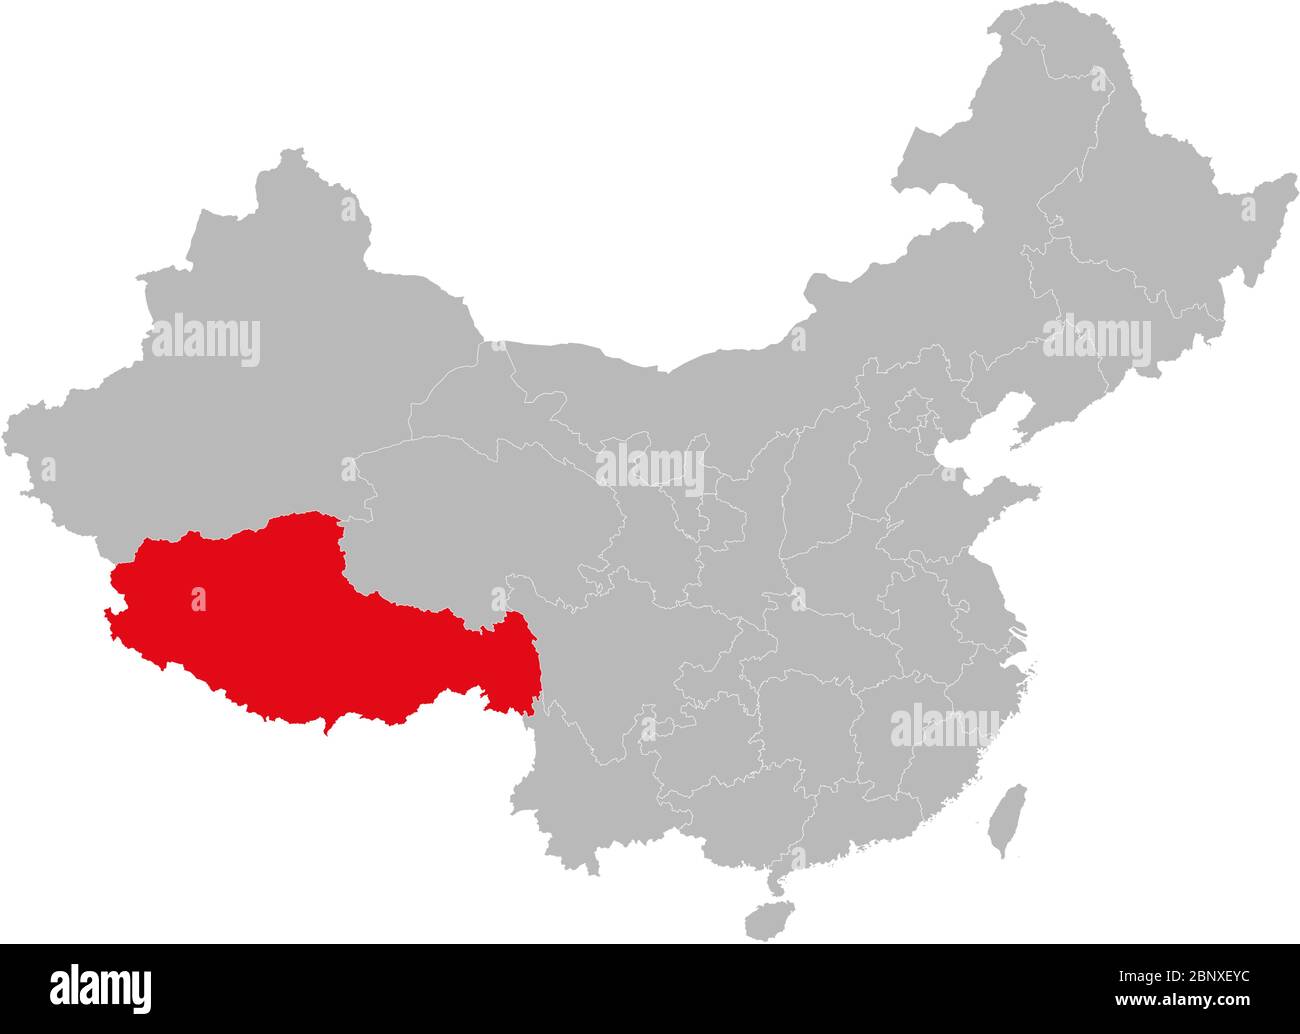 Xizang province highlighted on china map. Gray background. Asian country. Stock Vector